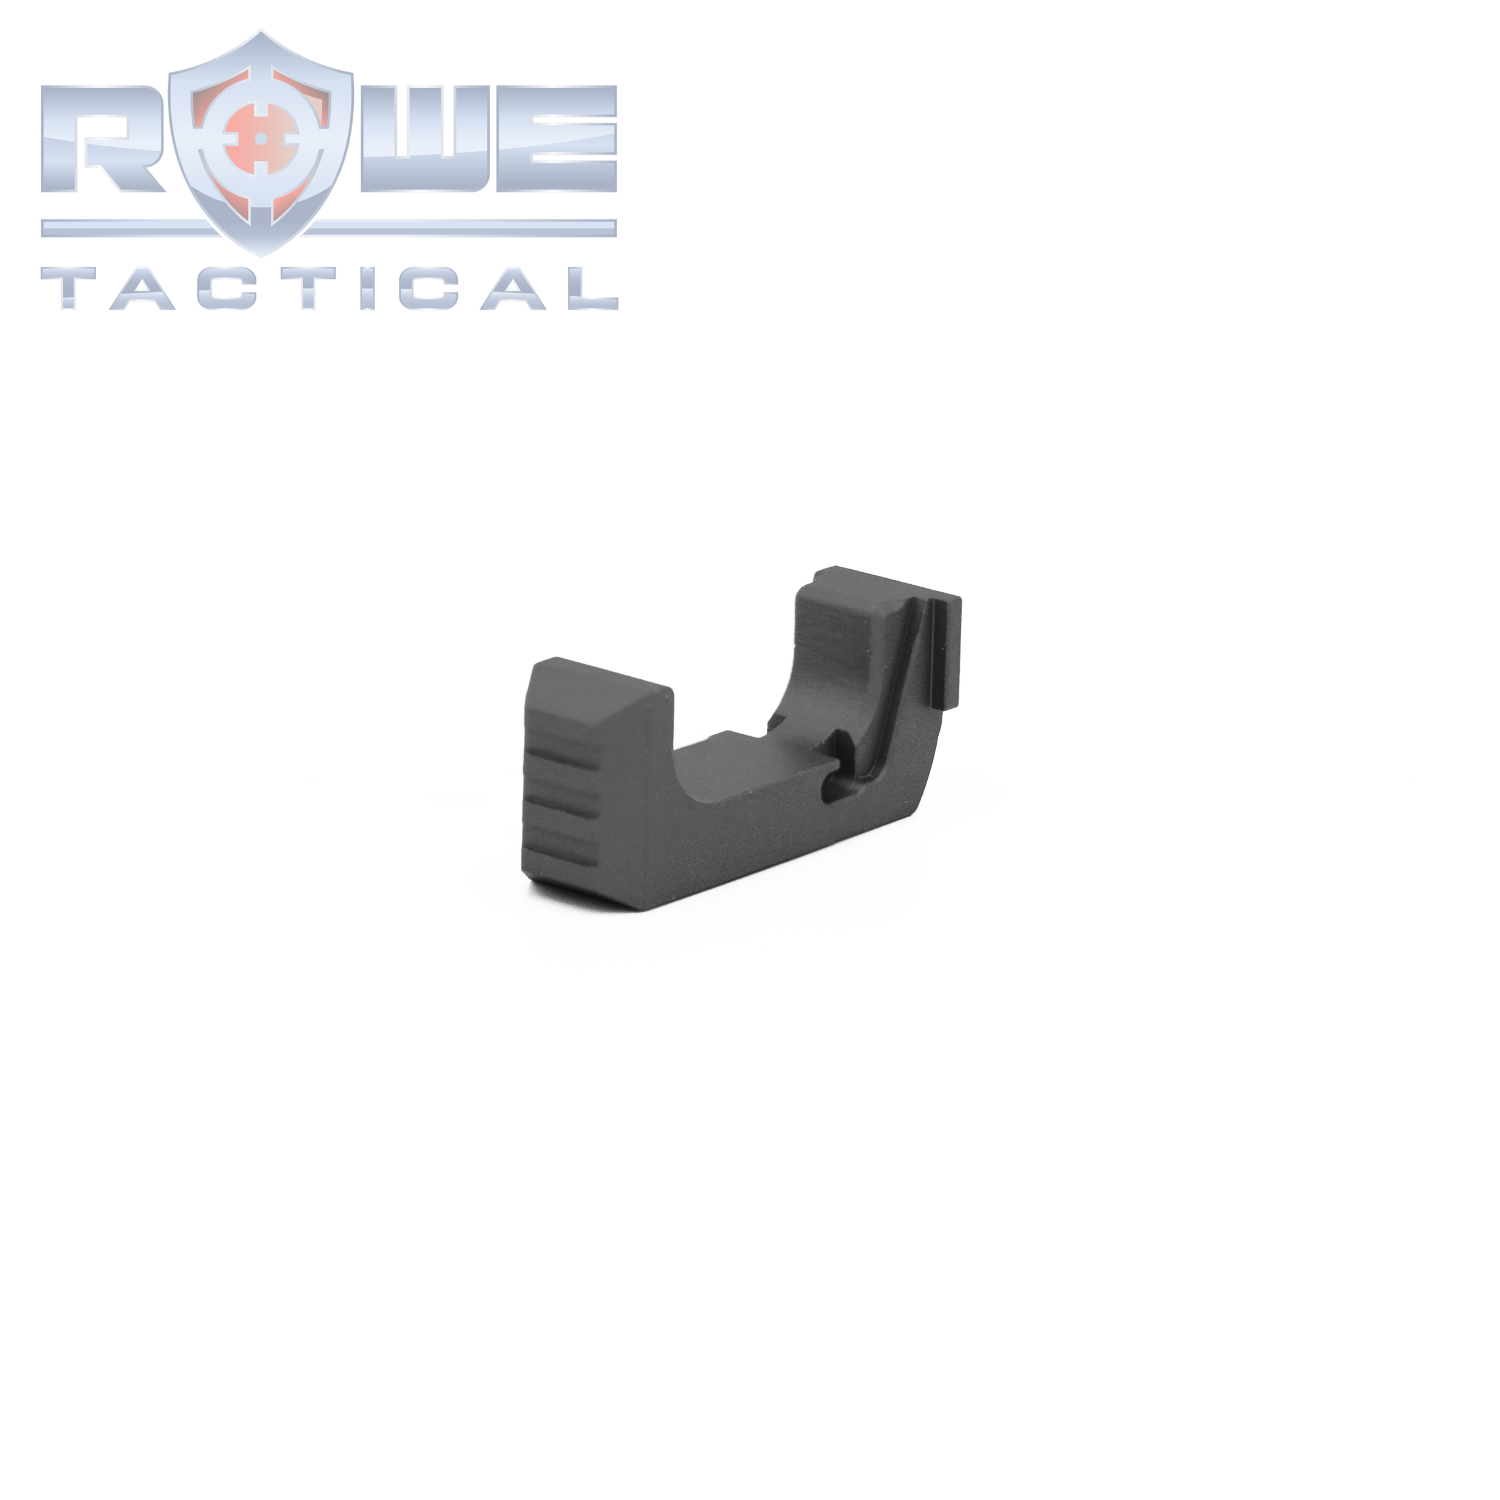 Rowe Tactical Extended Mag Release for Glock 43 / G43 - Black Anodized Aluminum Rowe Tactical 100063 - фотография #4